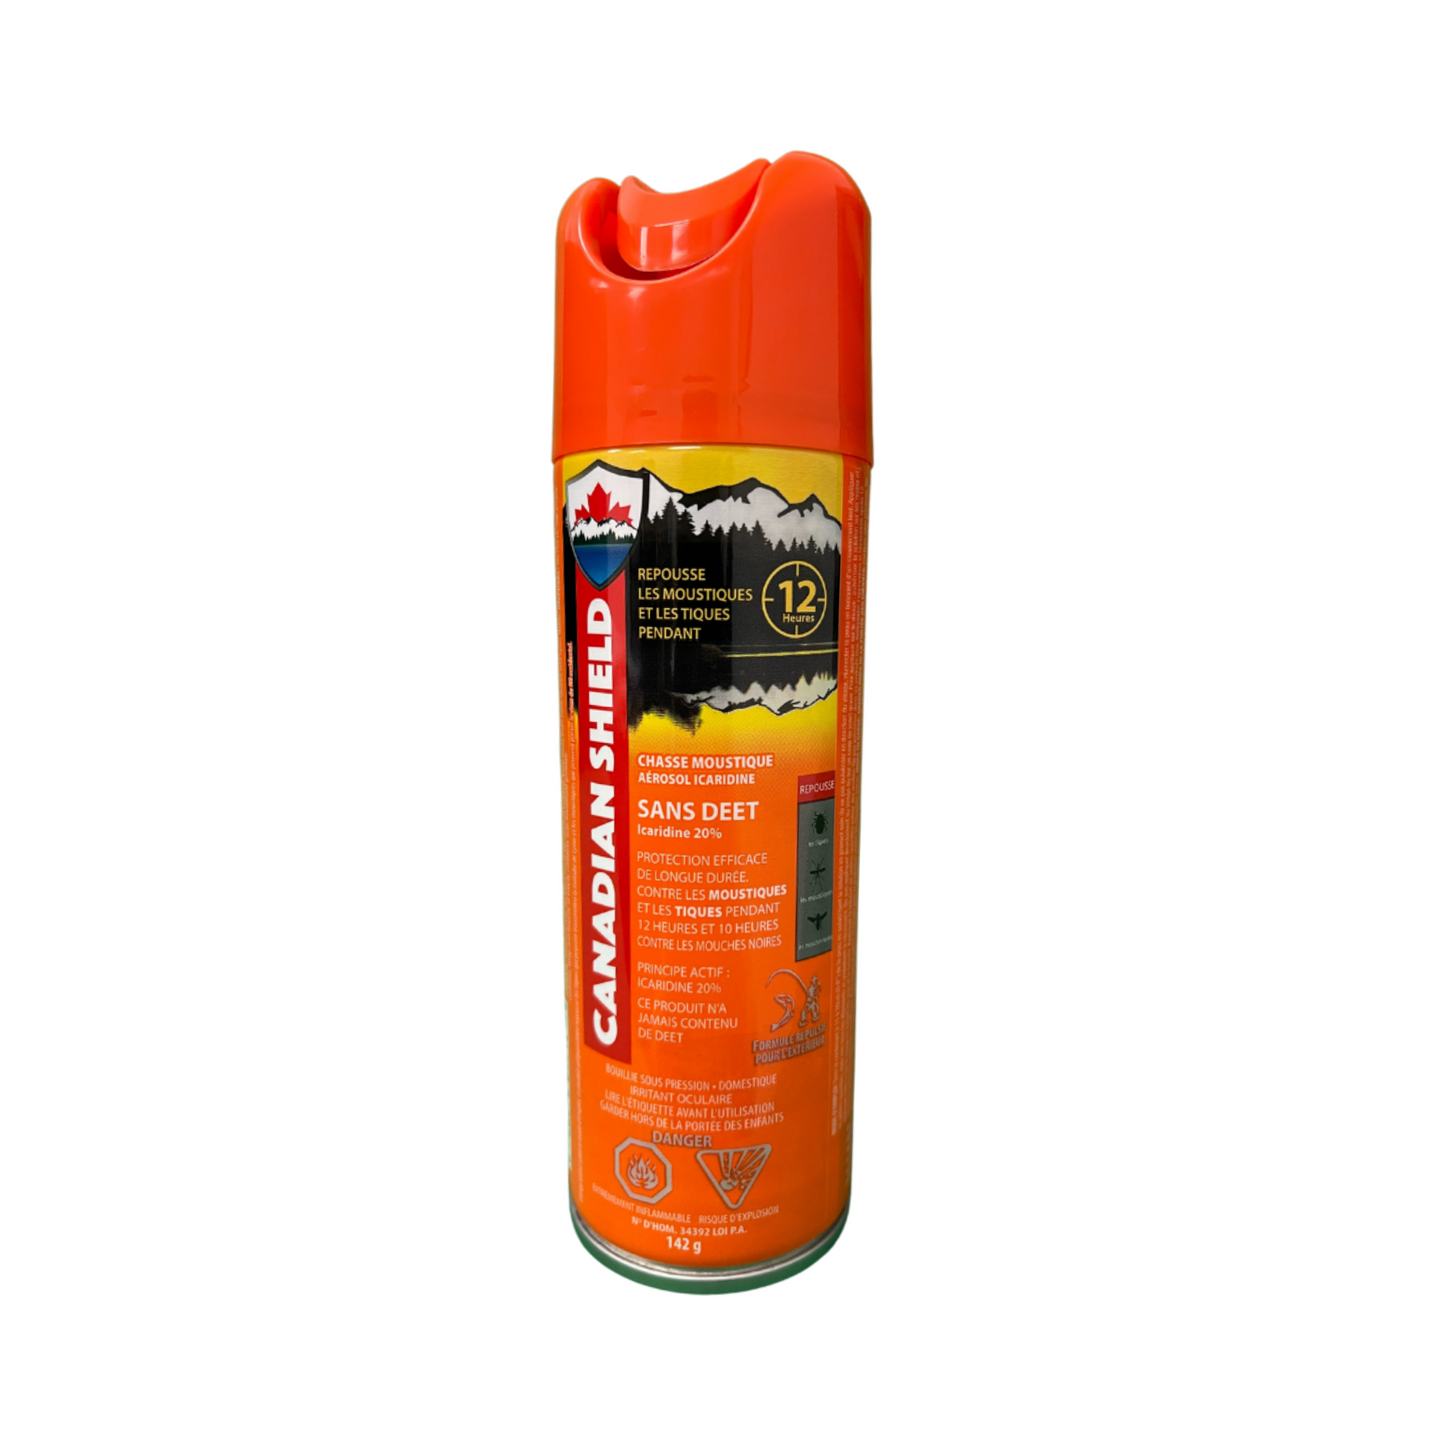 Canadian Shield Mosquito & Insect Repellent Aerosol | DEET FREE! | Bug Spray Formulated for Hunting, Fishing, Camping, Family Fun, and Anything Outdoors | Up to 12 Hours of Protection (142G)